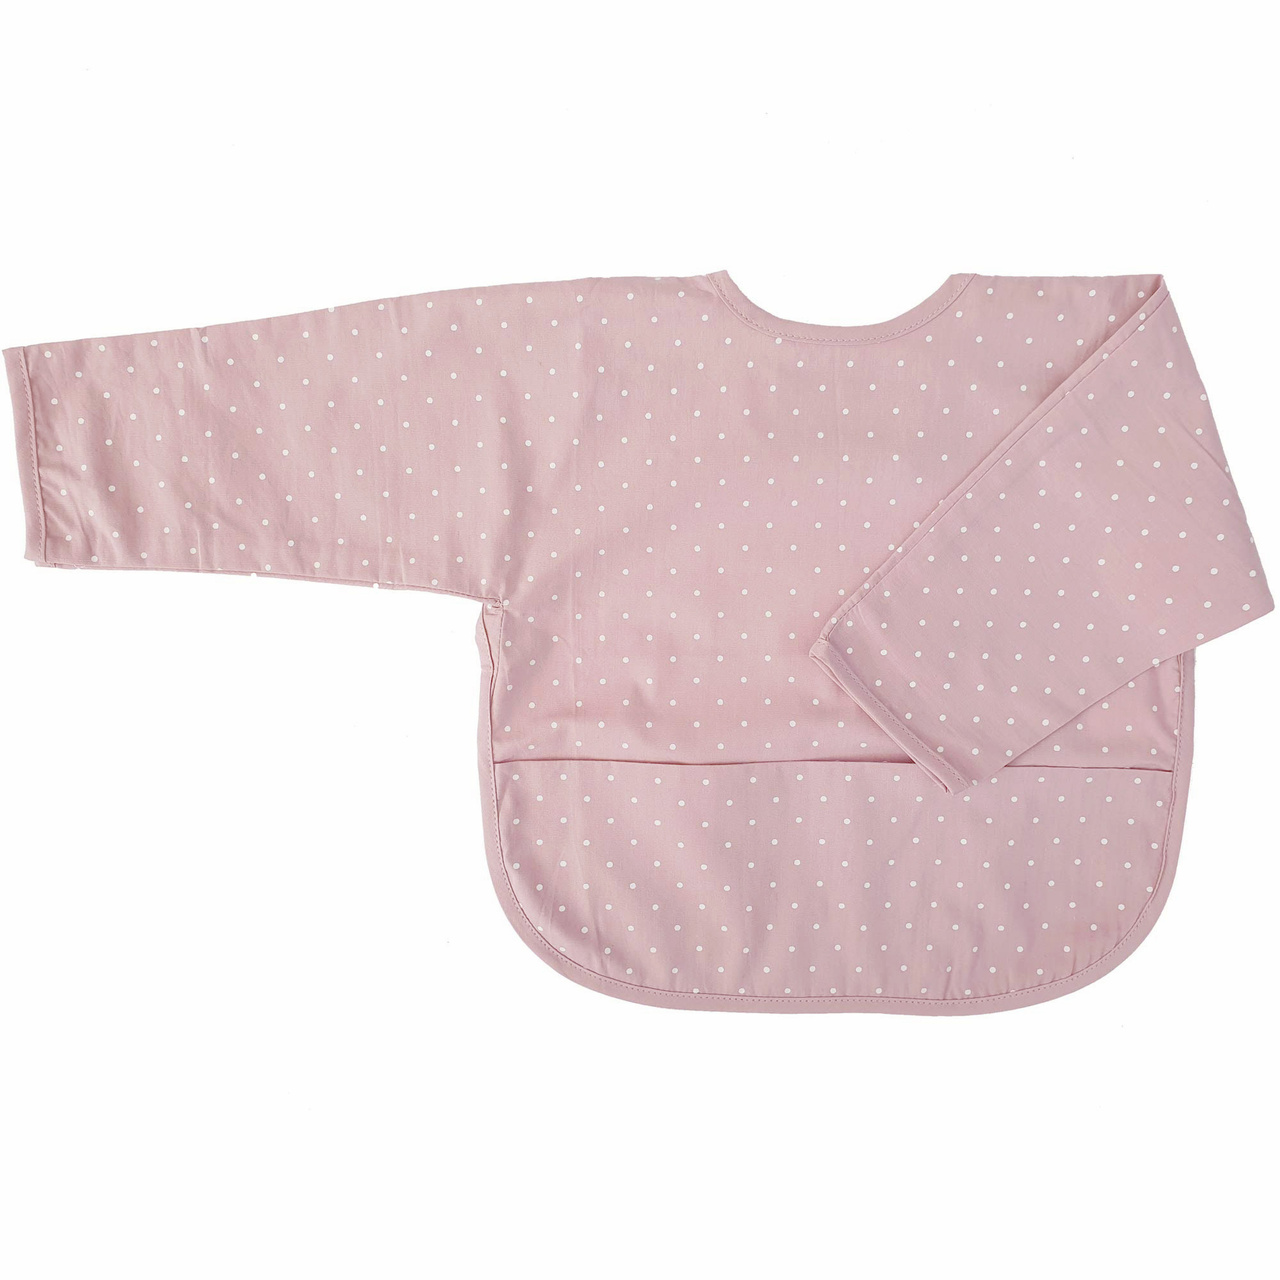 Bib with sleeves pale pink dotty